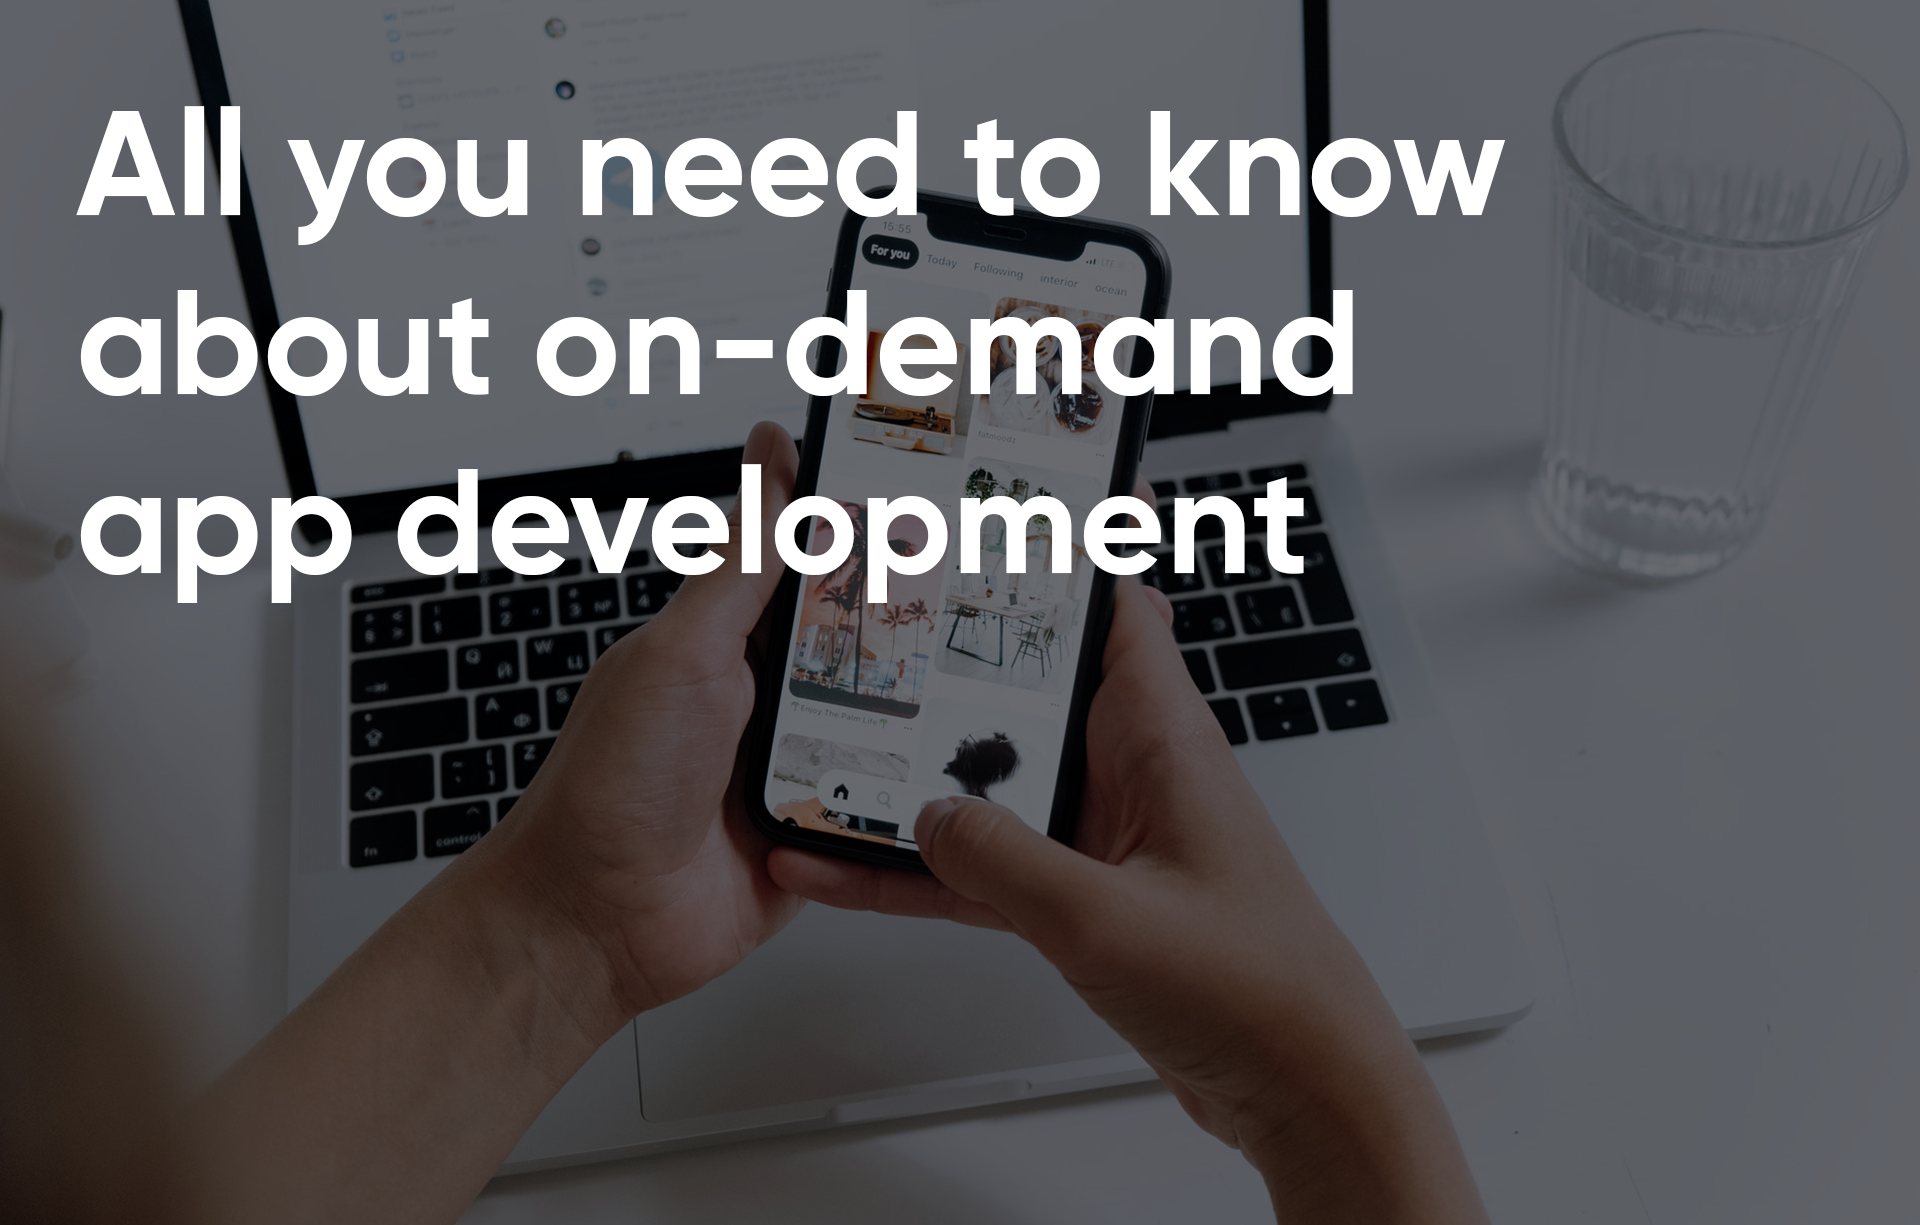 All-you-need-to-know-about-on-demand-app-development